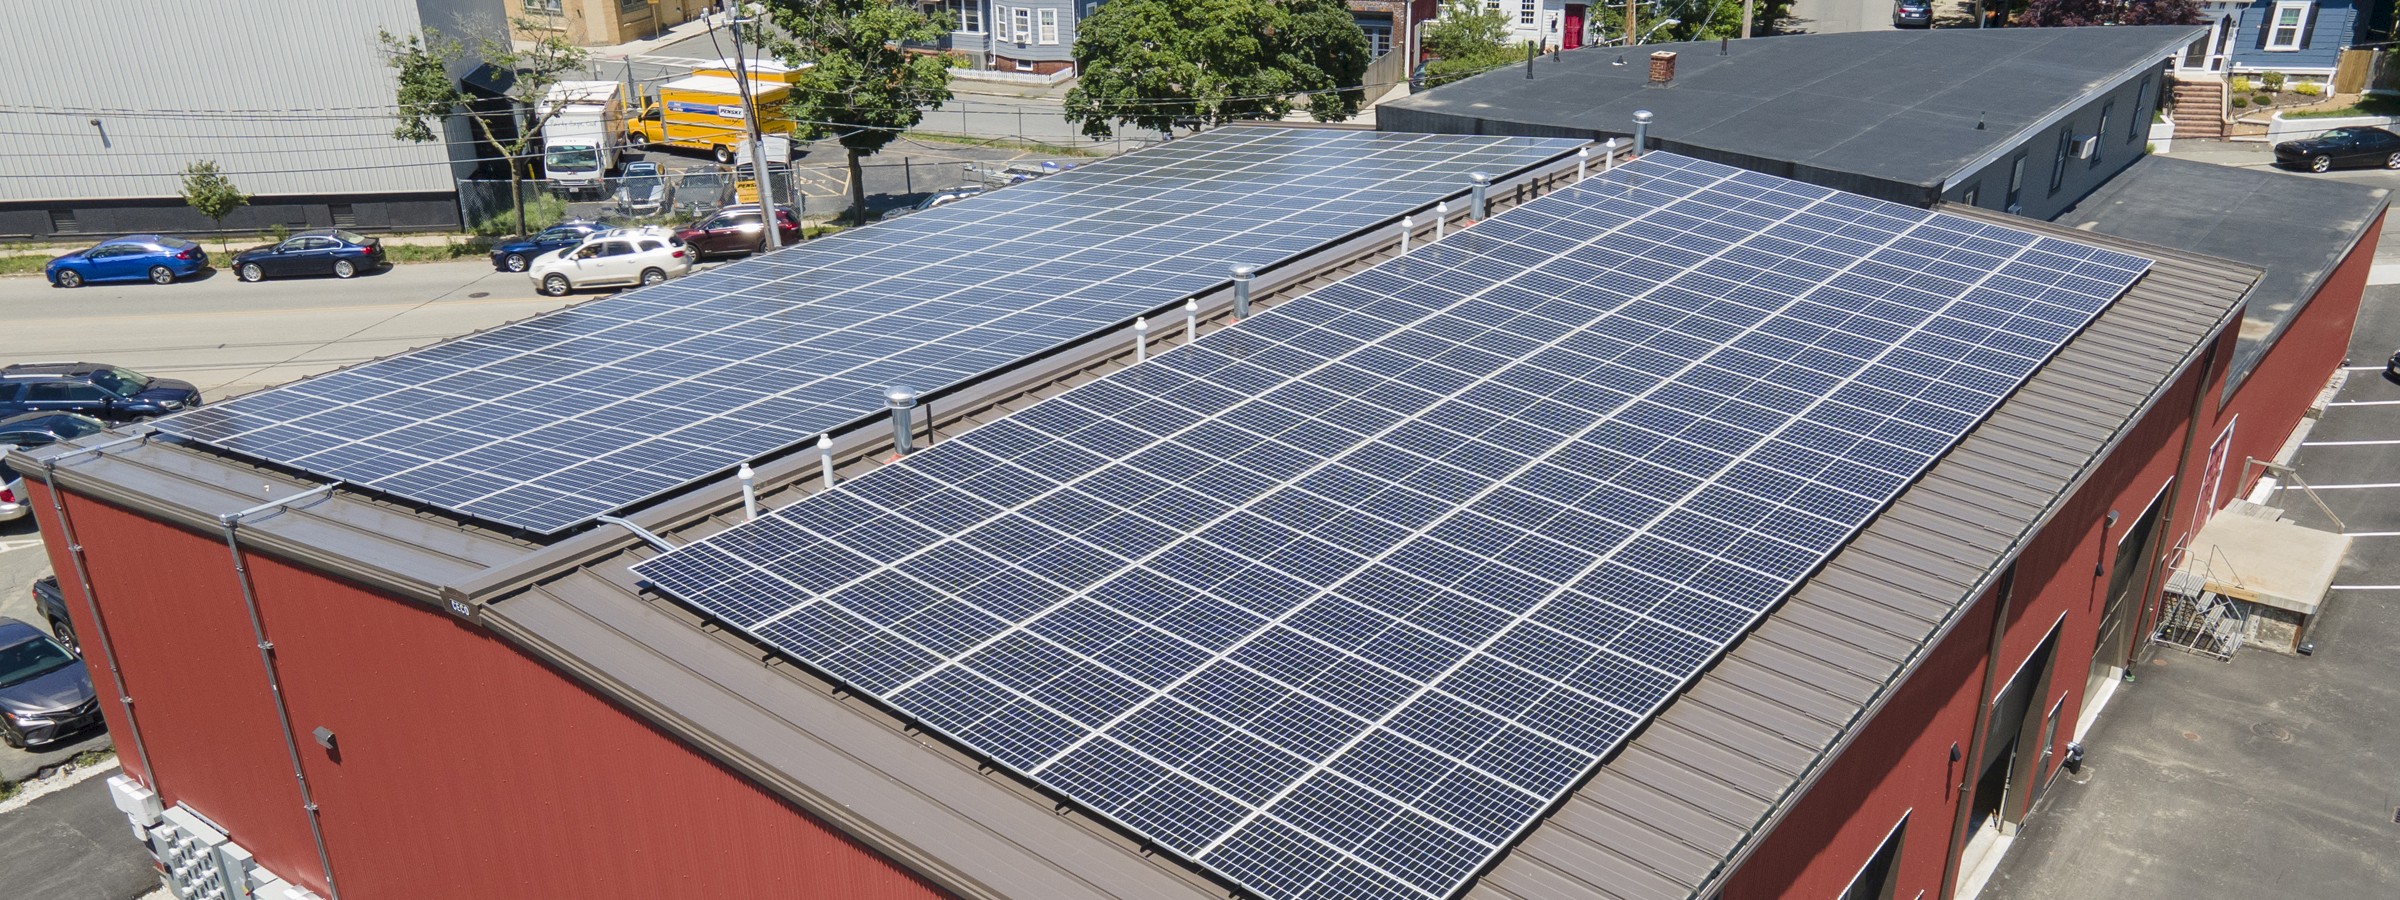 How Solar Can Help Your Business in 2022